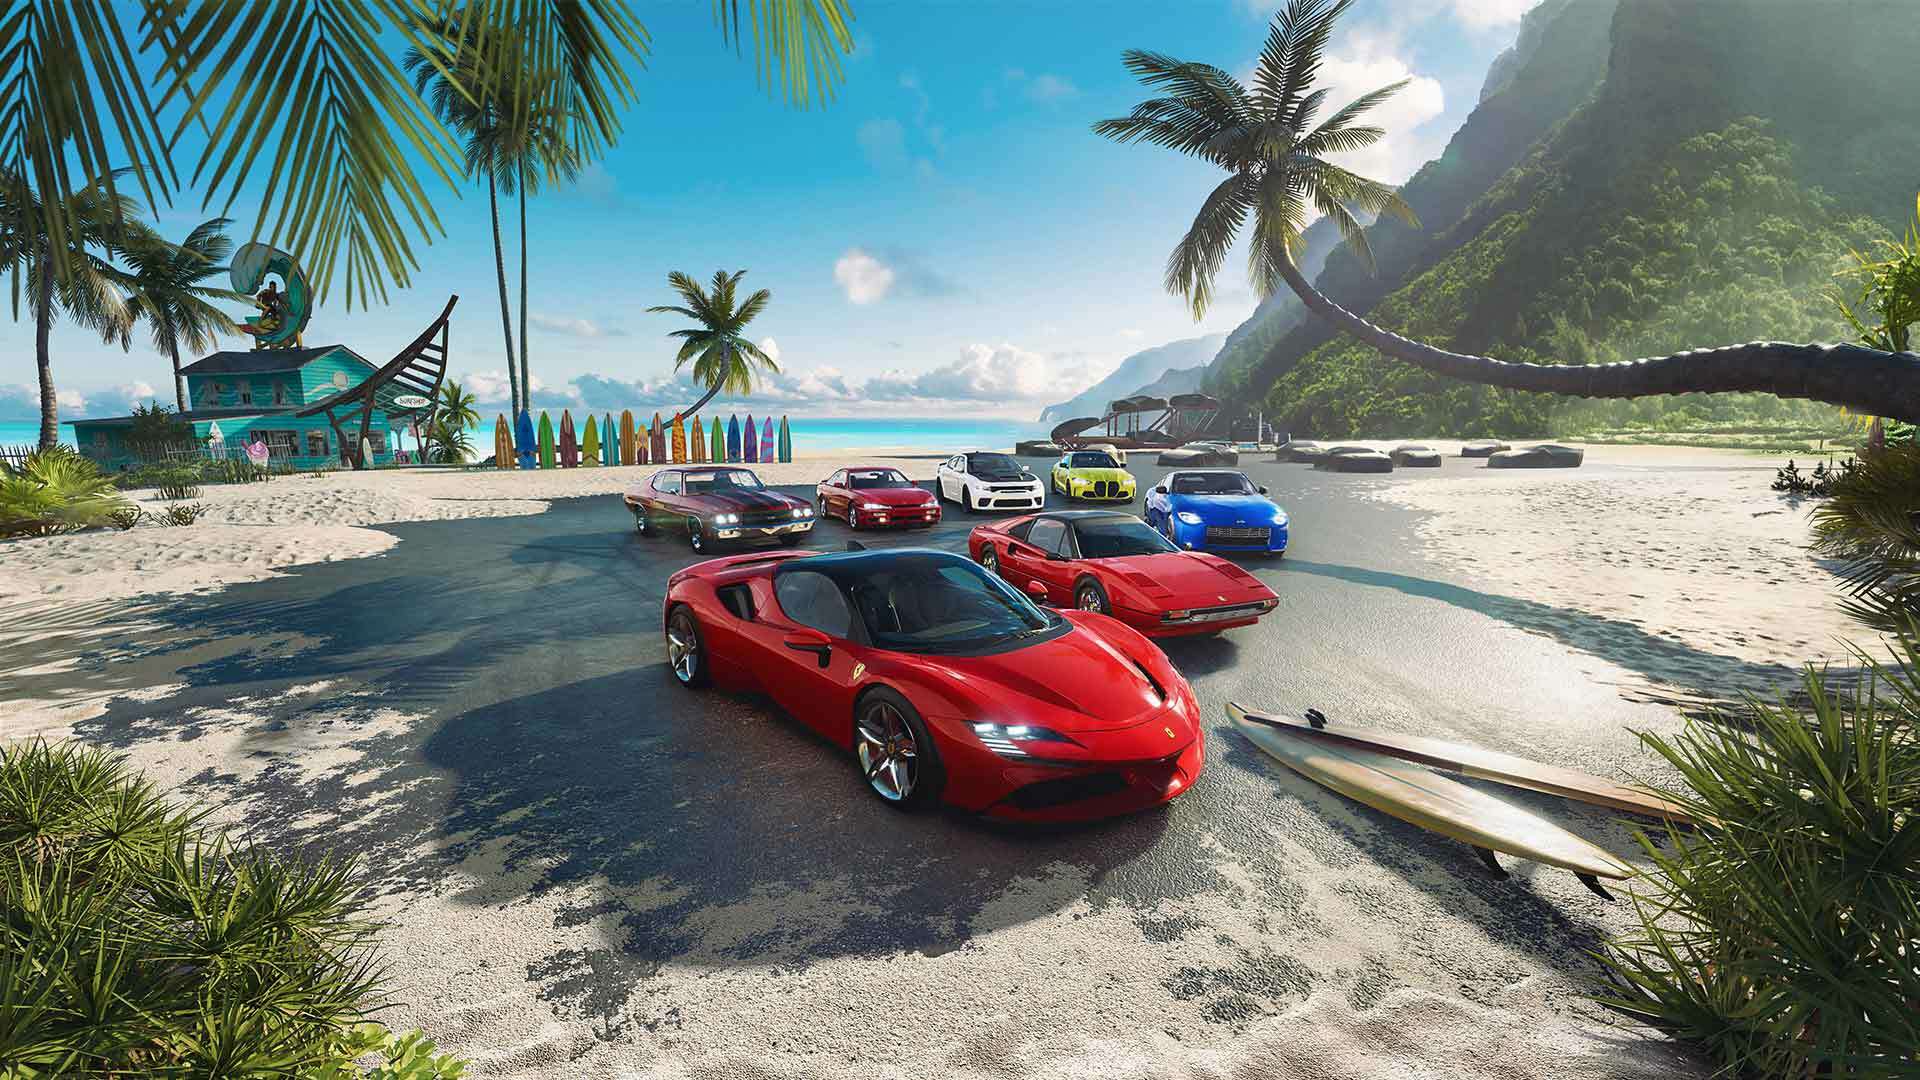 This underrated open-world racing game is now on Steam